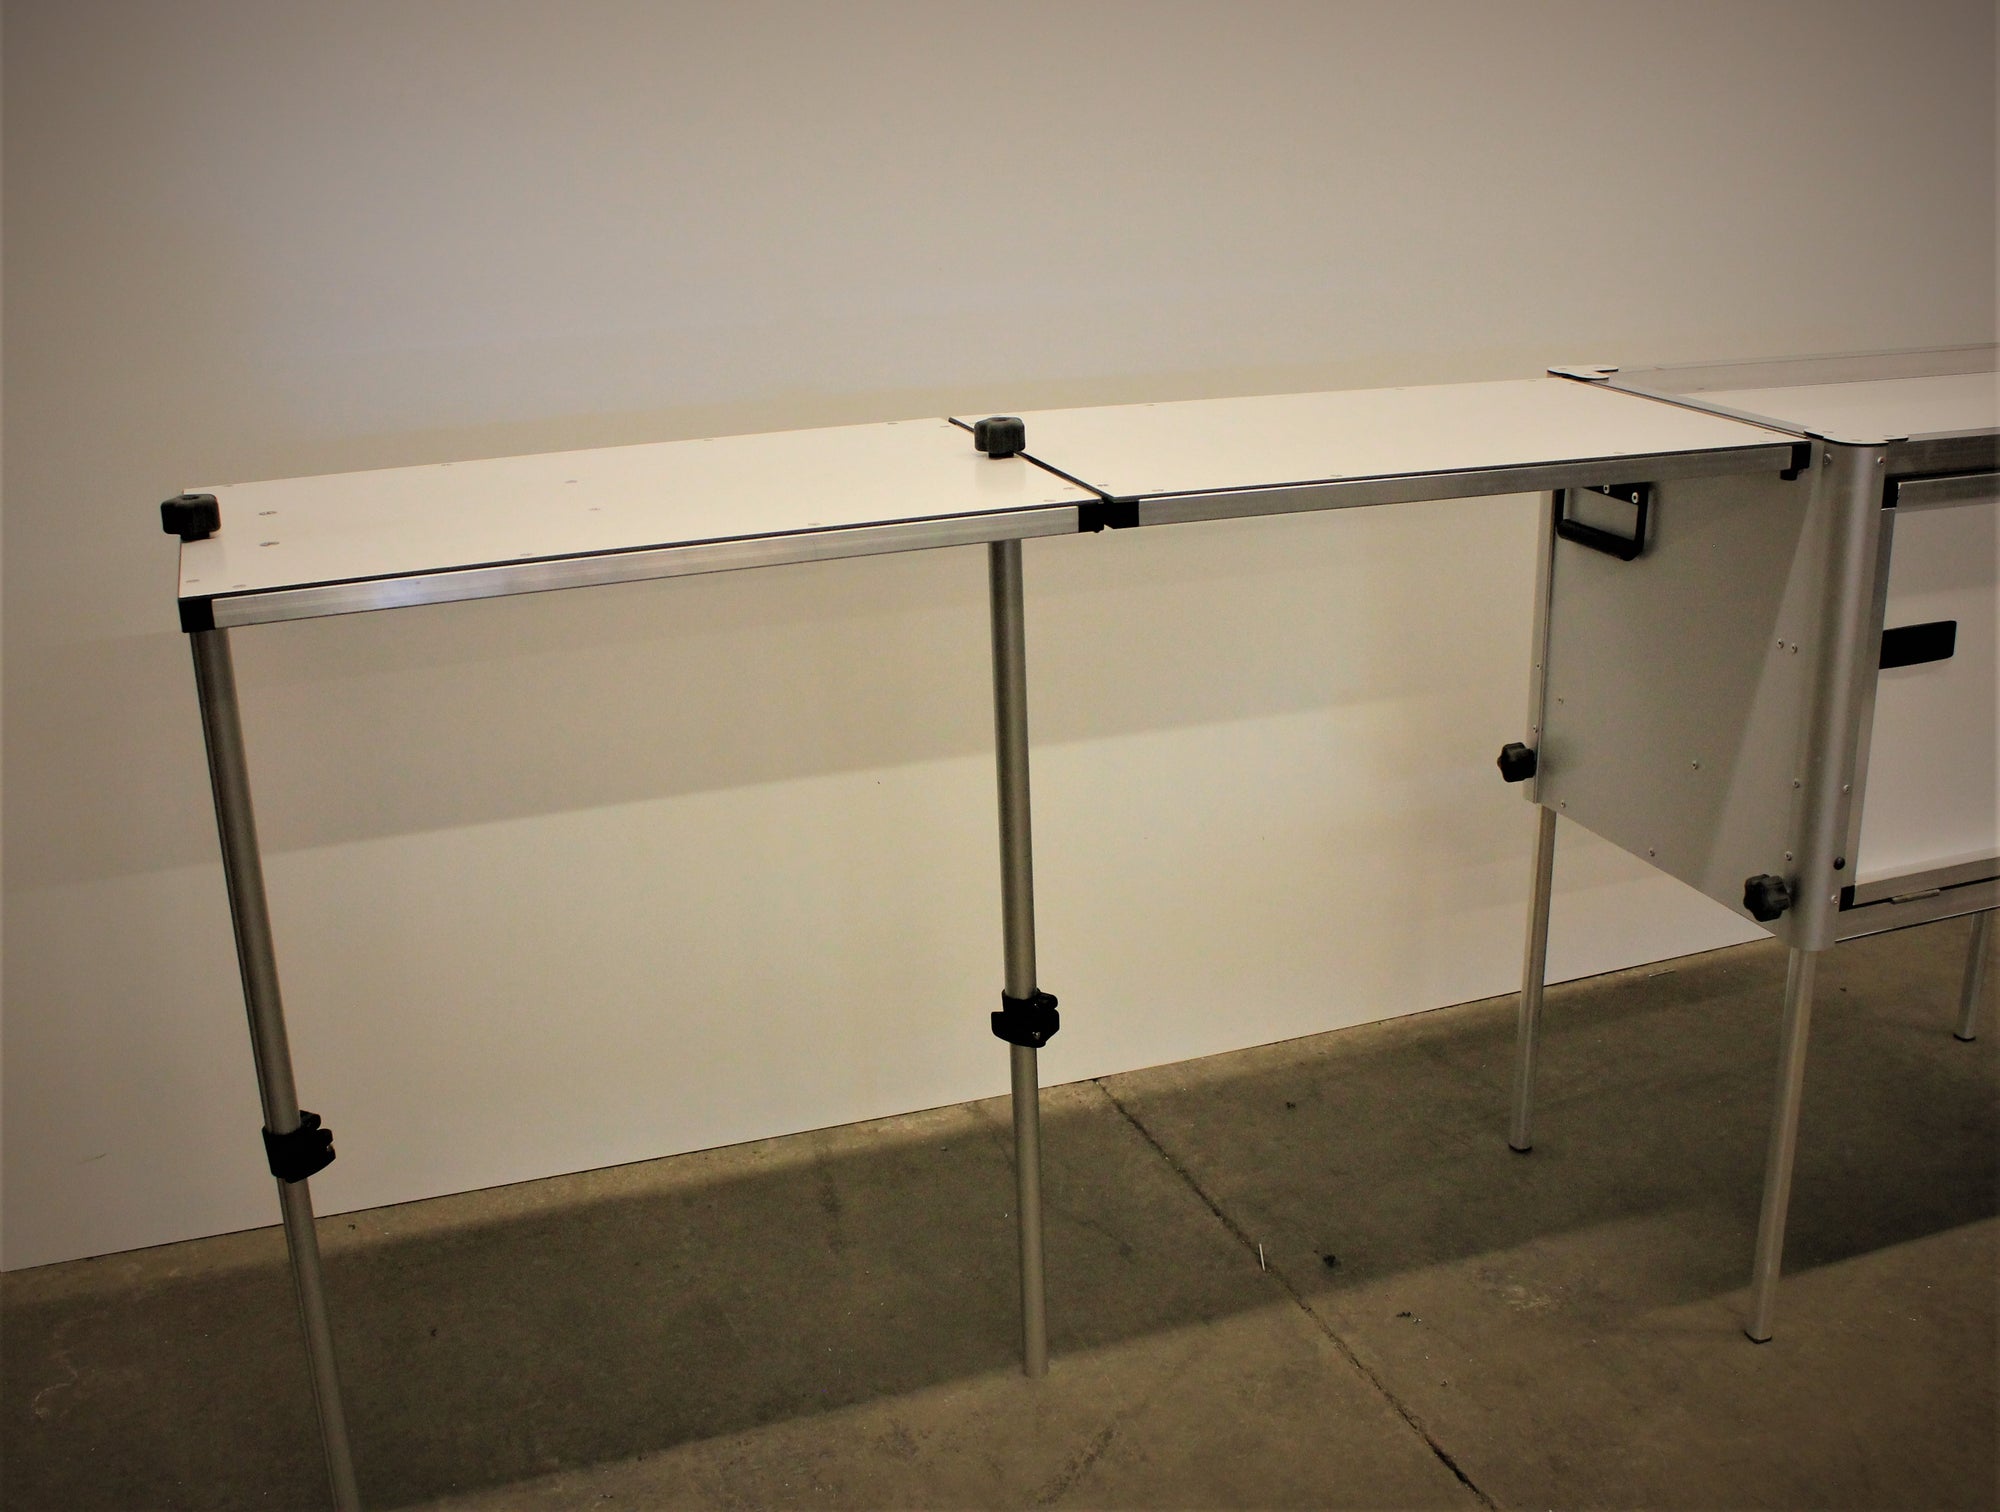 Additional Table for Chuck Box Portable Kitchen